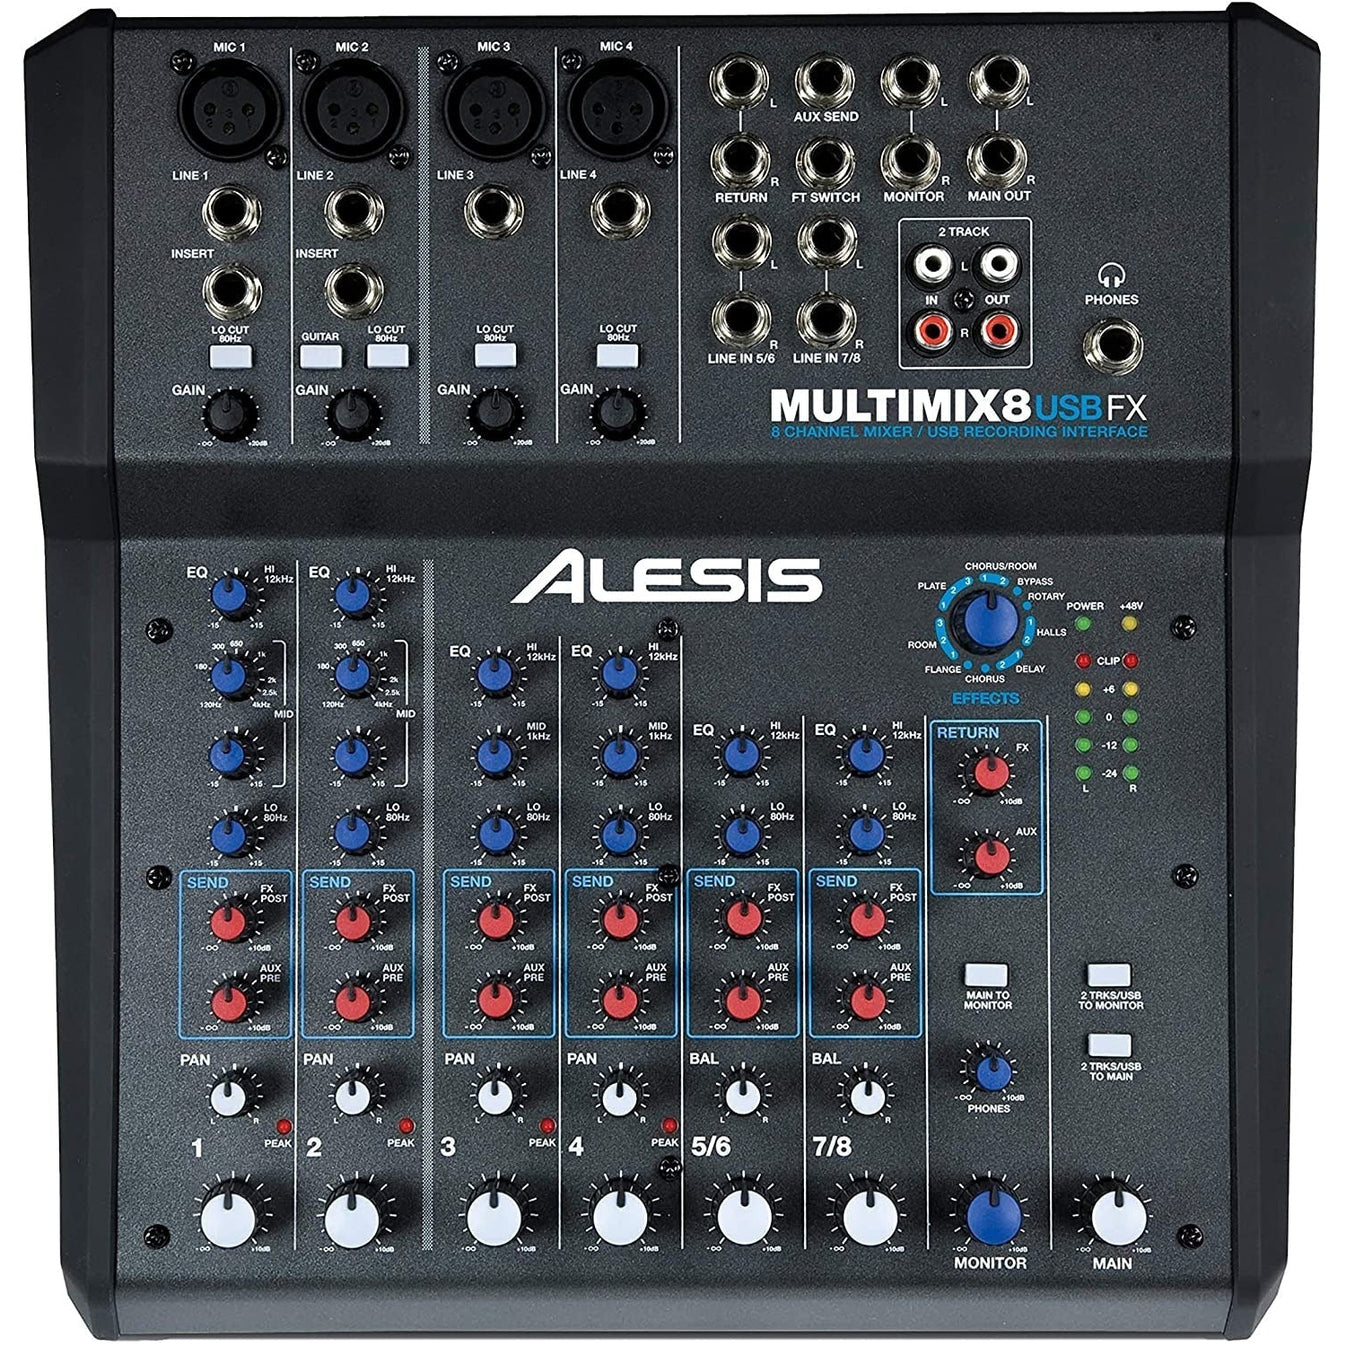 Mixer Alesis MultiMix 8 USB FX 8 Channel With FX-Mai Nguyên Music